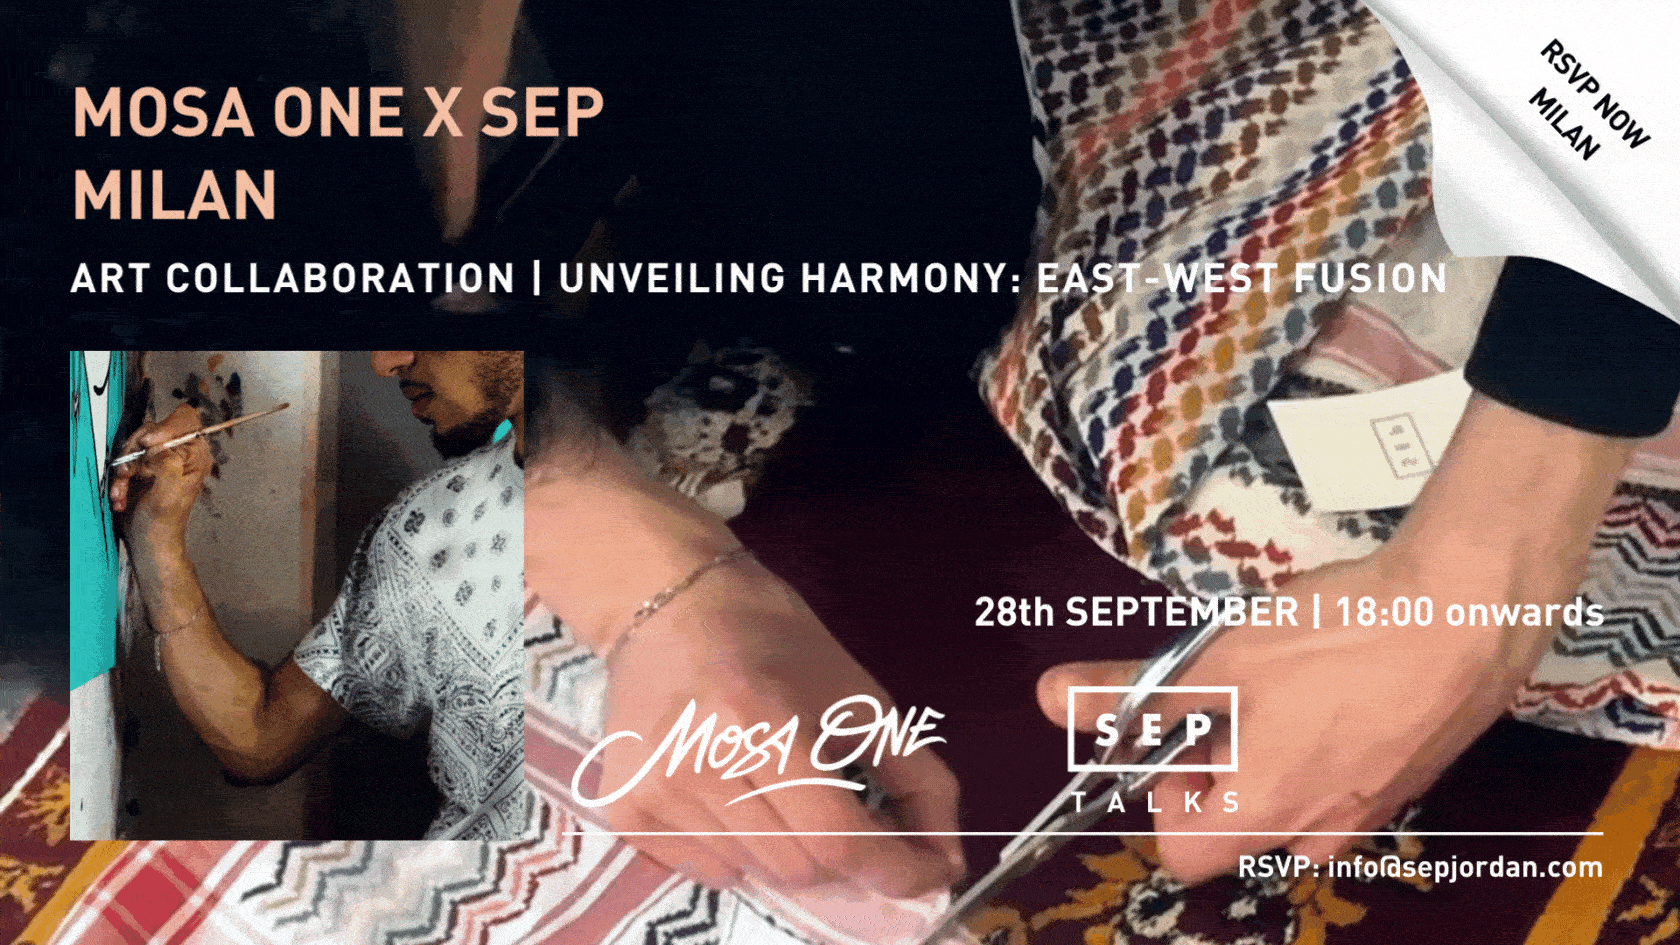 MOSA ONE FOR SEP Art Collaboration | Unveiling Harmony: East-West Fusion